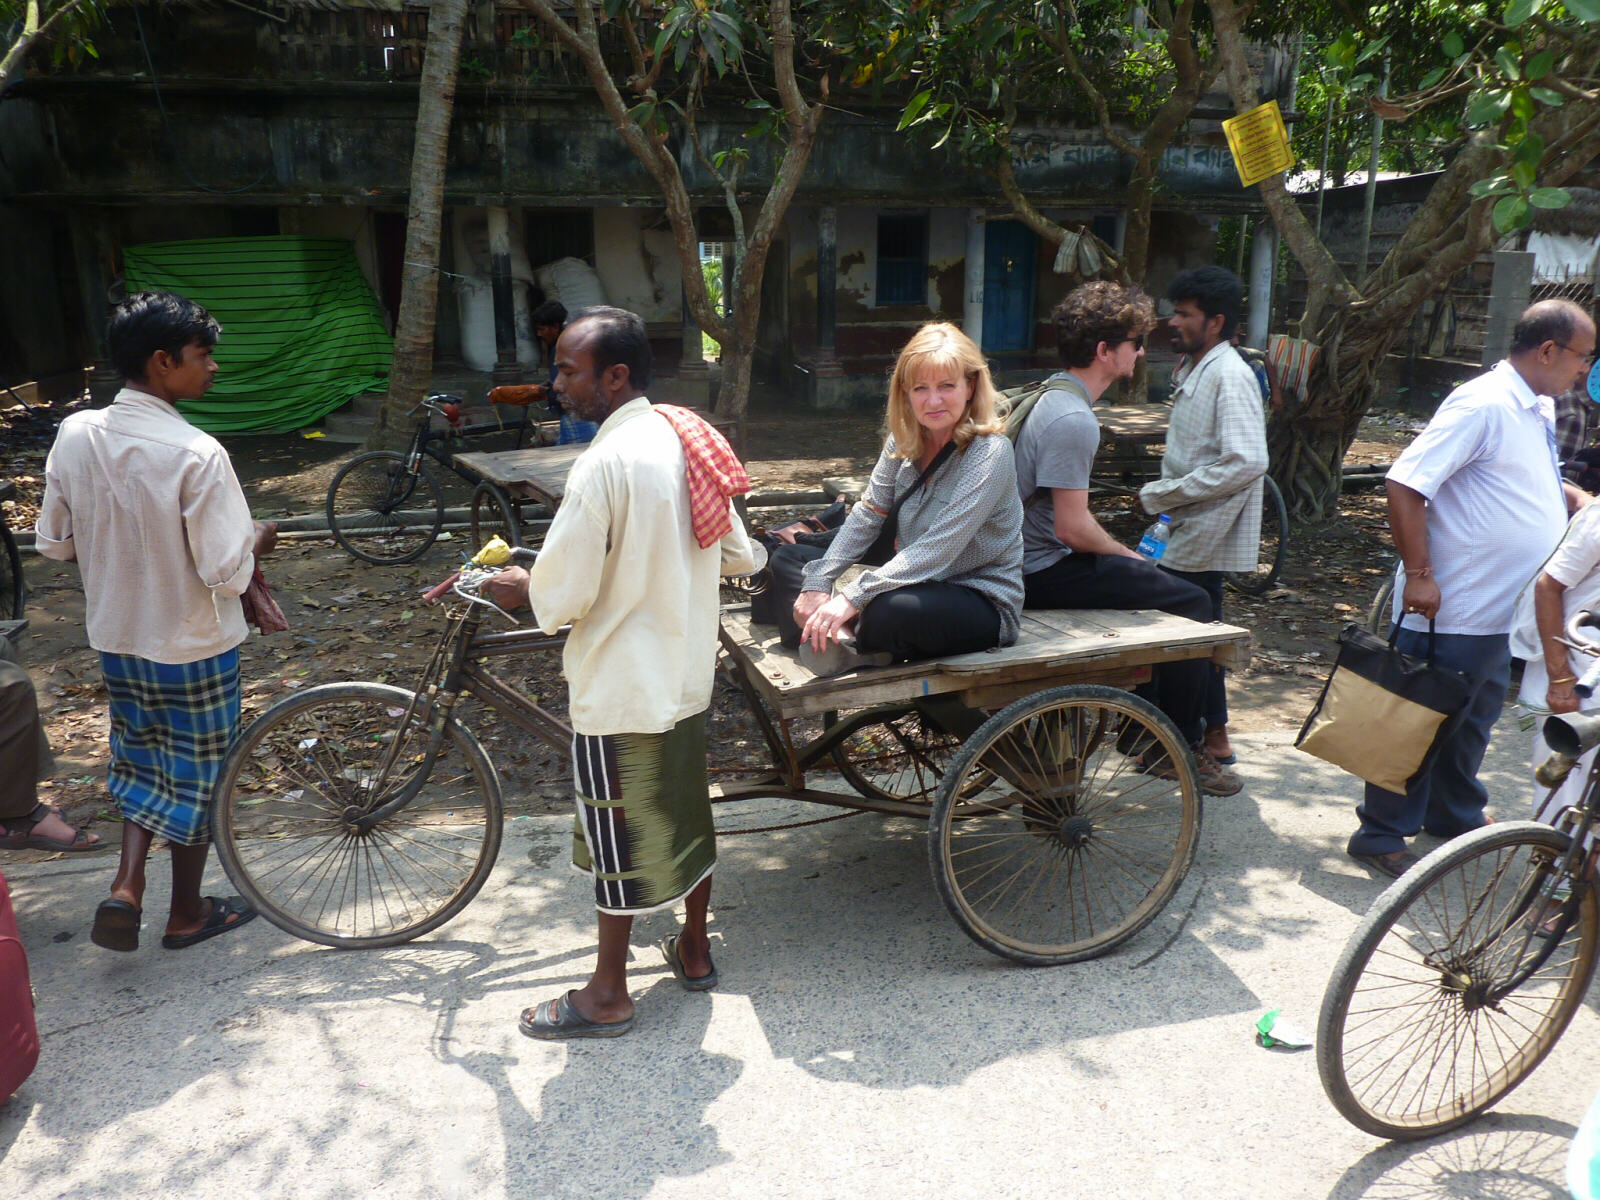 A flatbed cycle rickshaw on an island in the Sundarbans, West Bengal, India